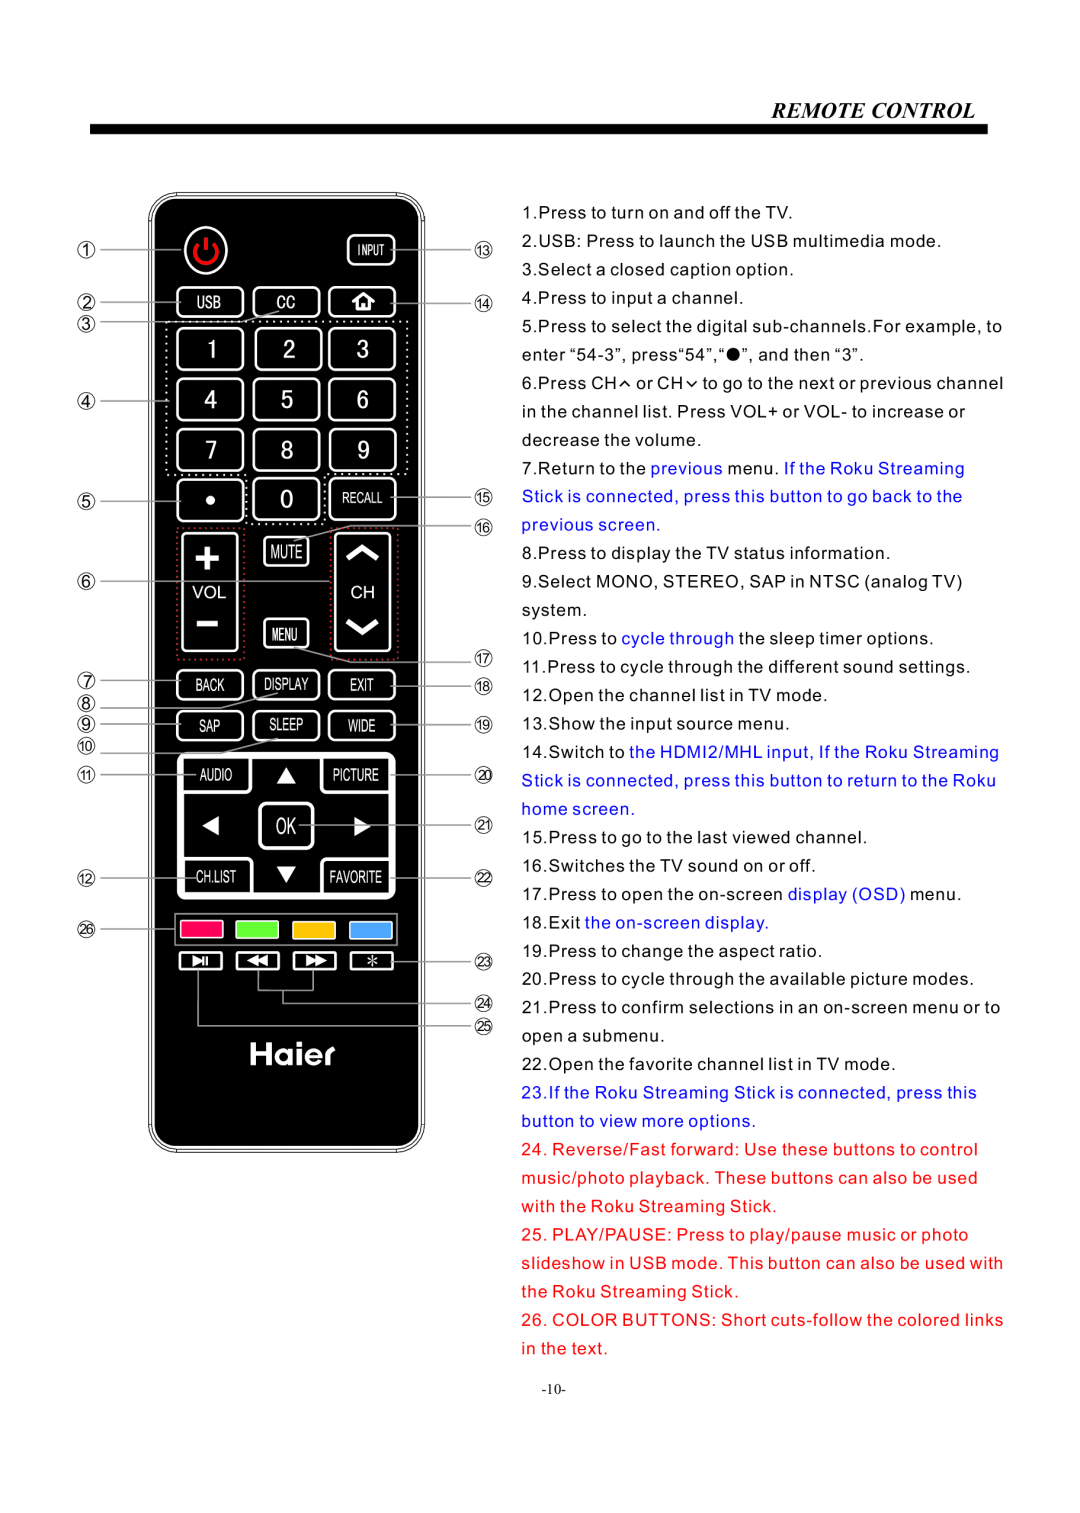 Haier LE55F32800 manual Remote Control, Return to the previous menu. If the Roku Streaming, previous screen, home screen 